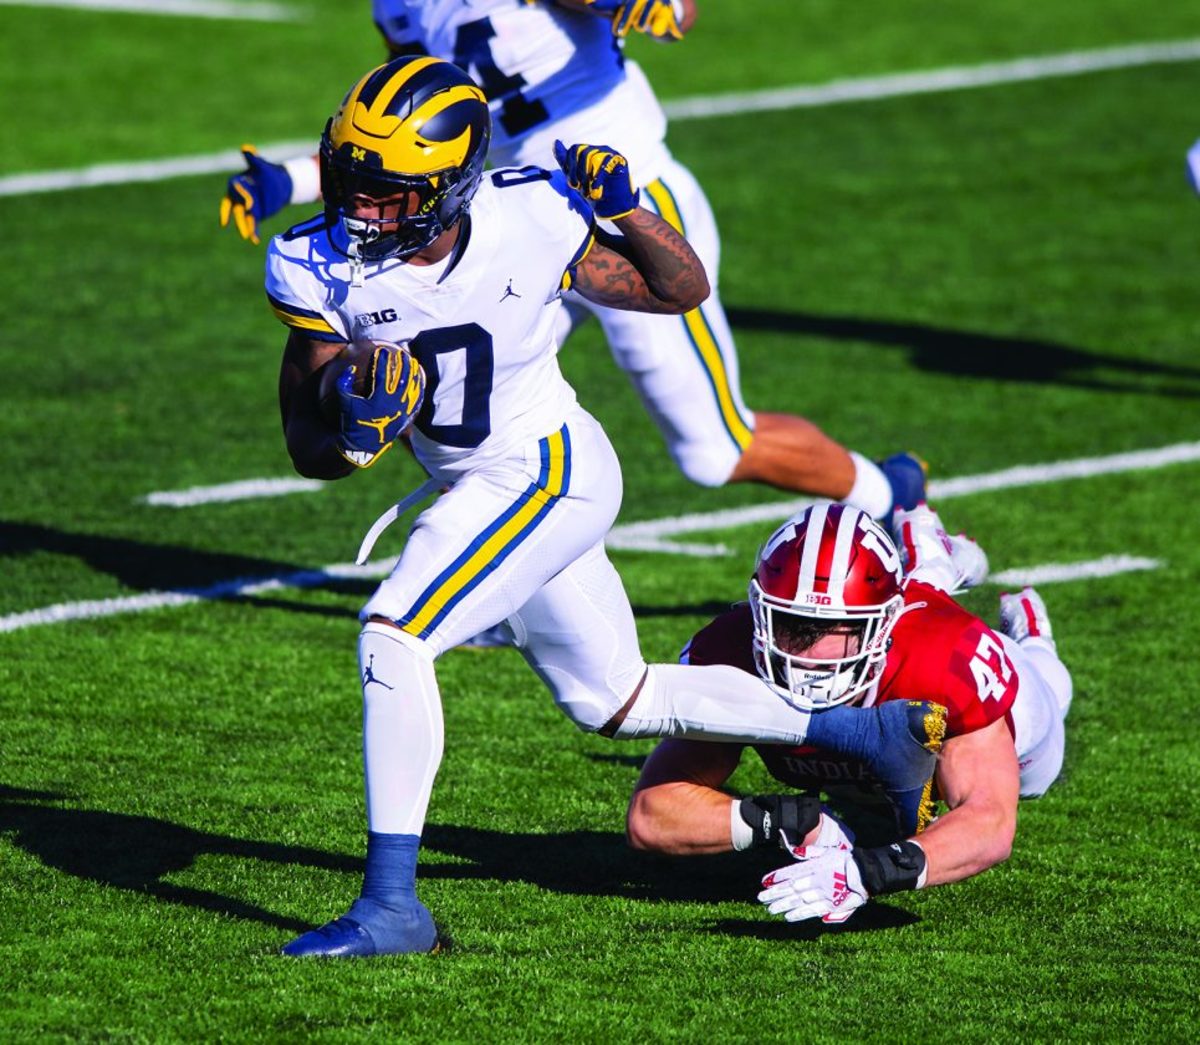 AP photo Indiana linebacker Micah McFadden (47) is kicked in the face while trying to stop Michigan wide receiver Giles Jackson (0) as he runs the ball up field Saturday in Bloomington, Ind.